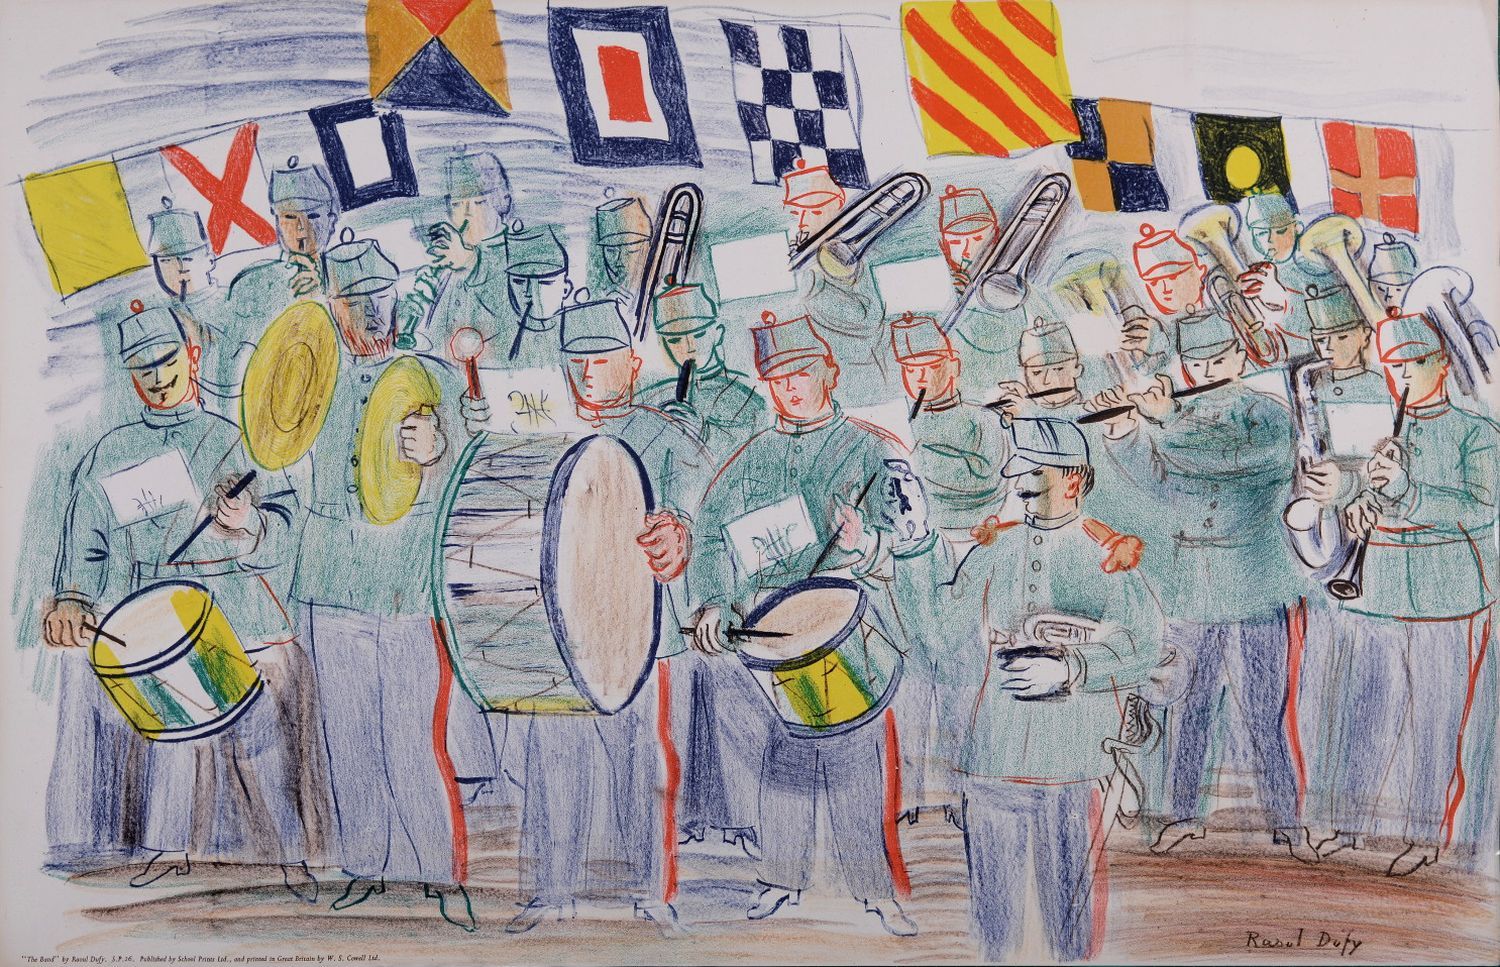 Raoul Dufy Raoul DUFY

The Band, 1949

Lithograph on wove paper

Signed on the p&hellip;